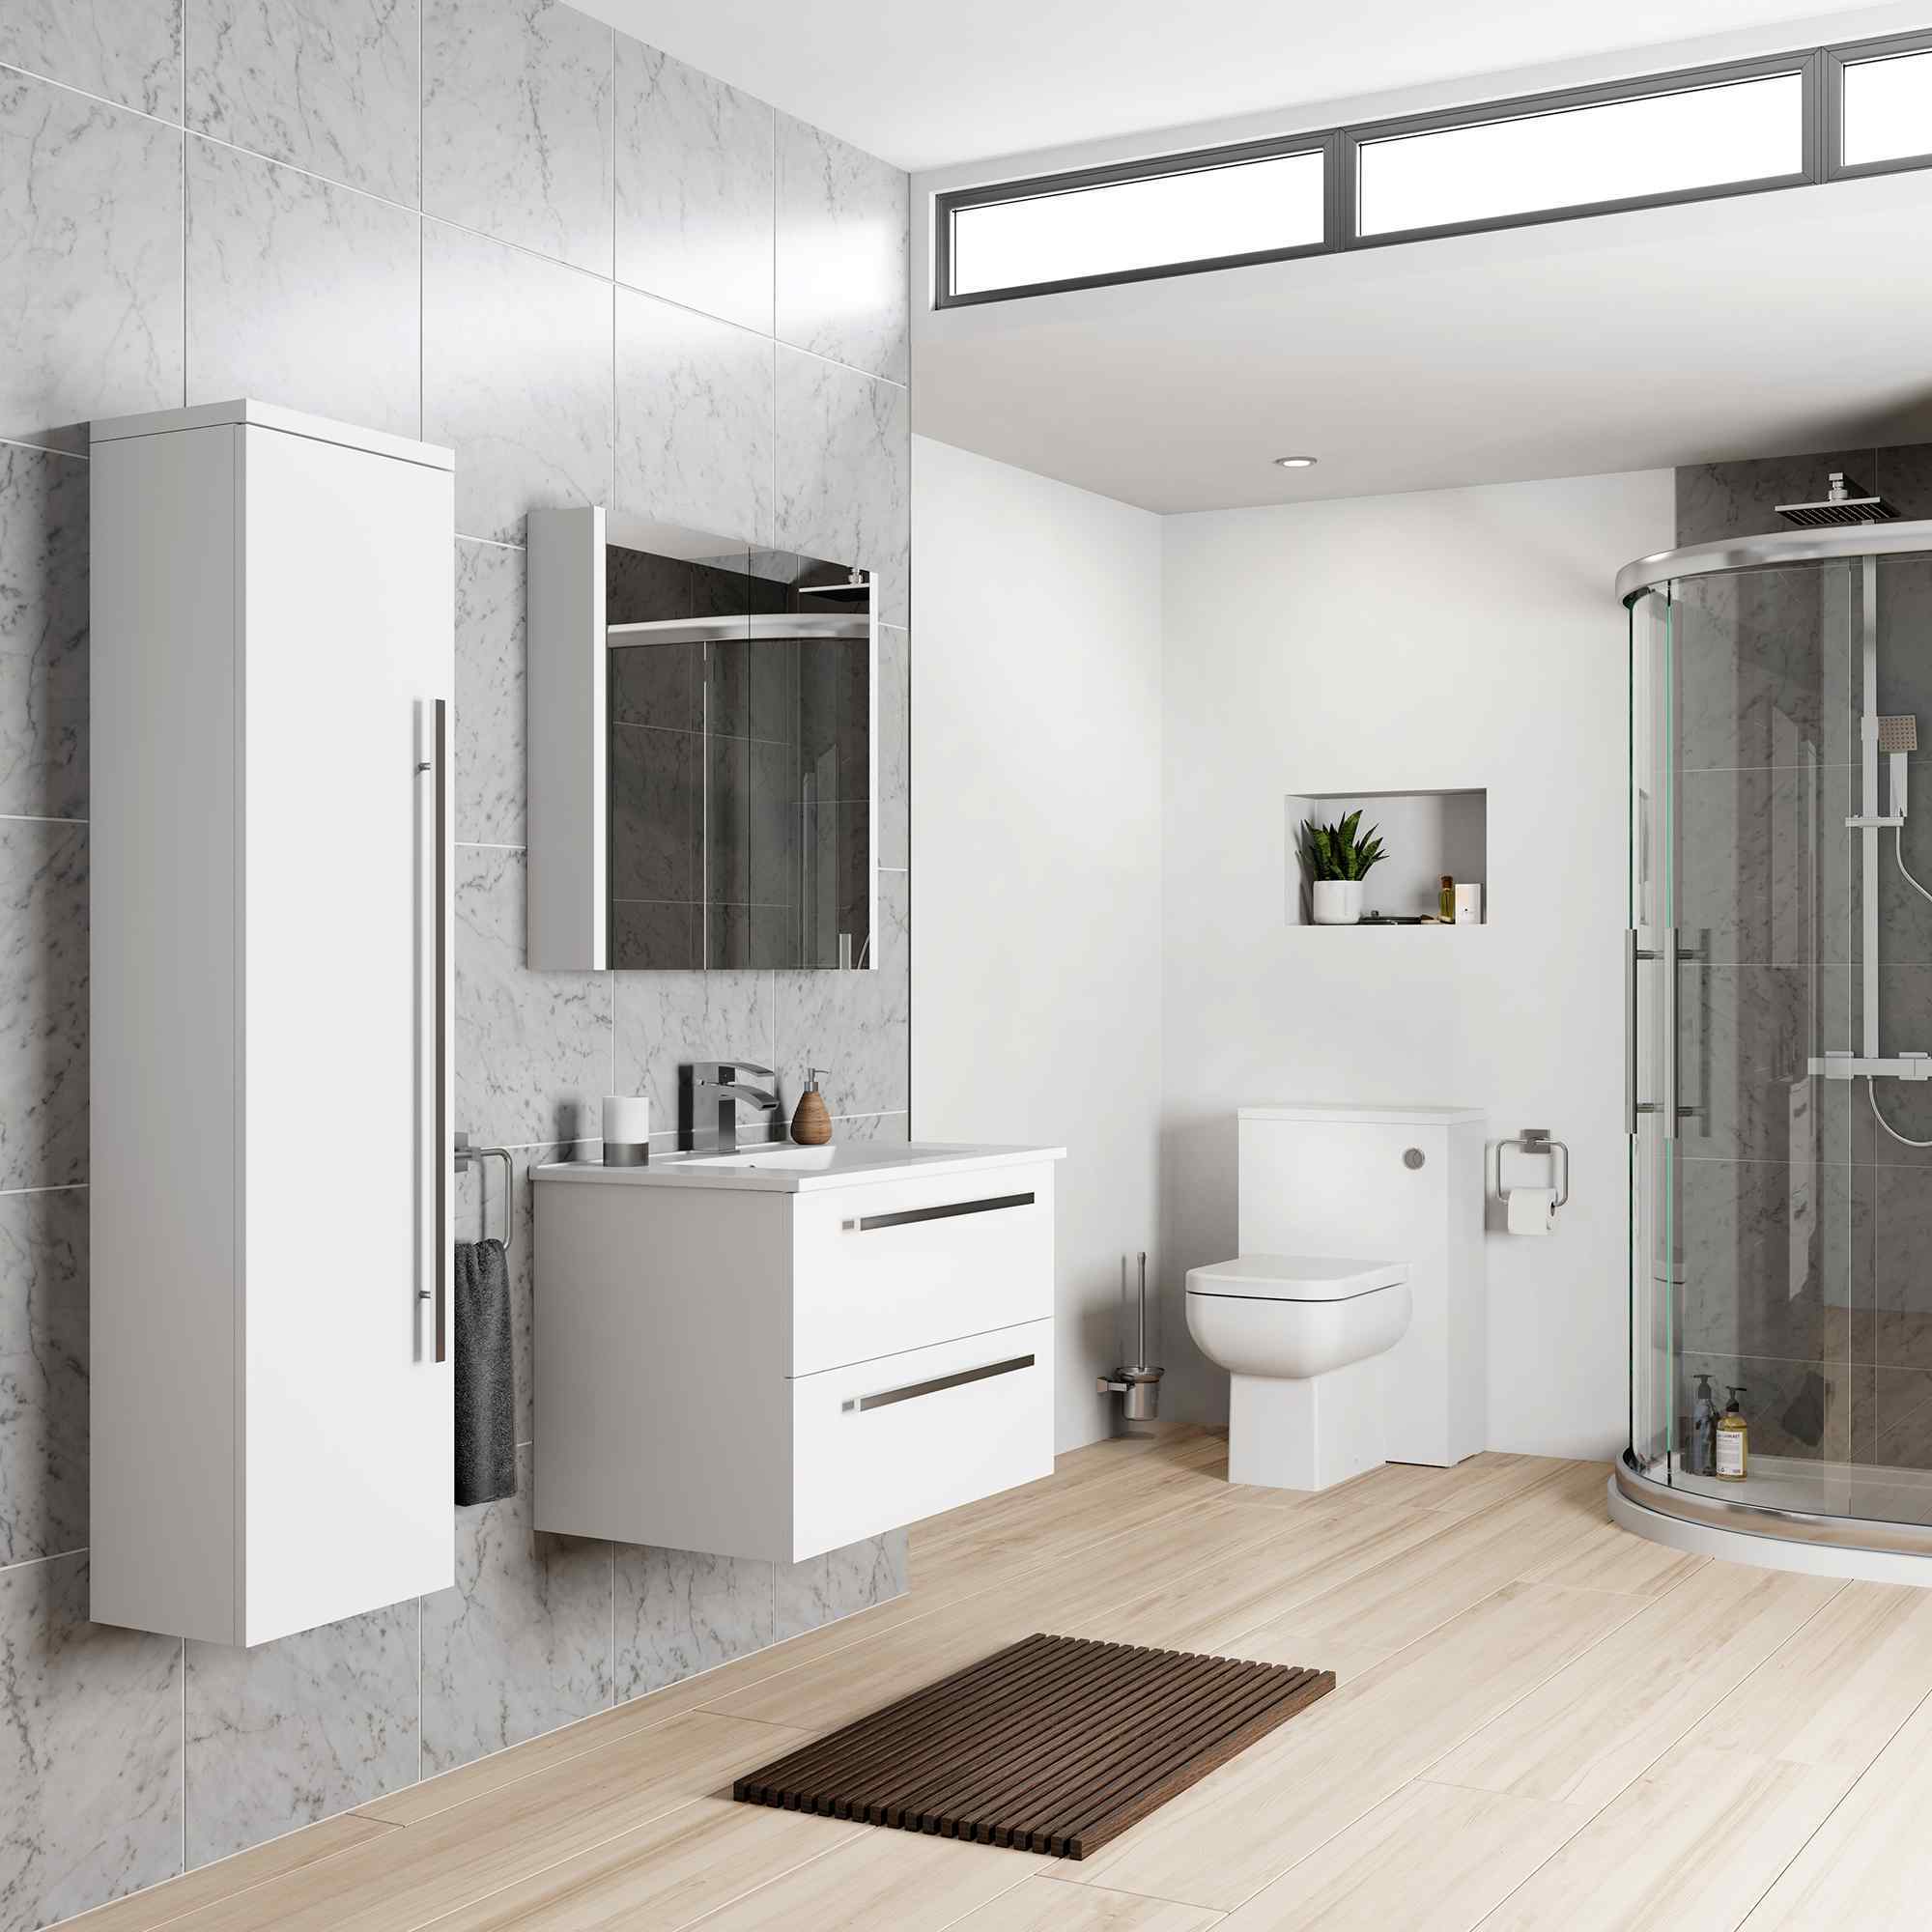 Compact bathroom layout with space-saving solutions - Keywords: small bathroom solutions